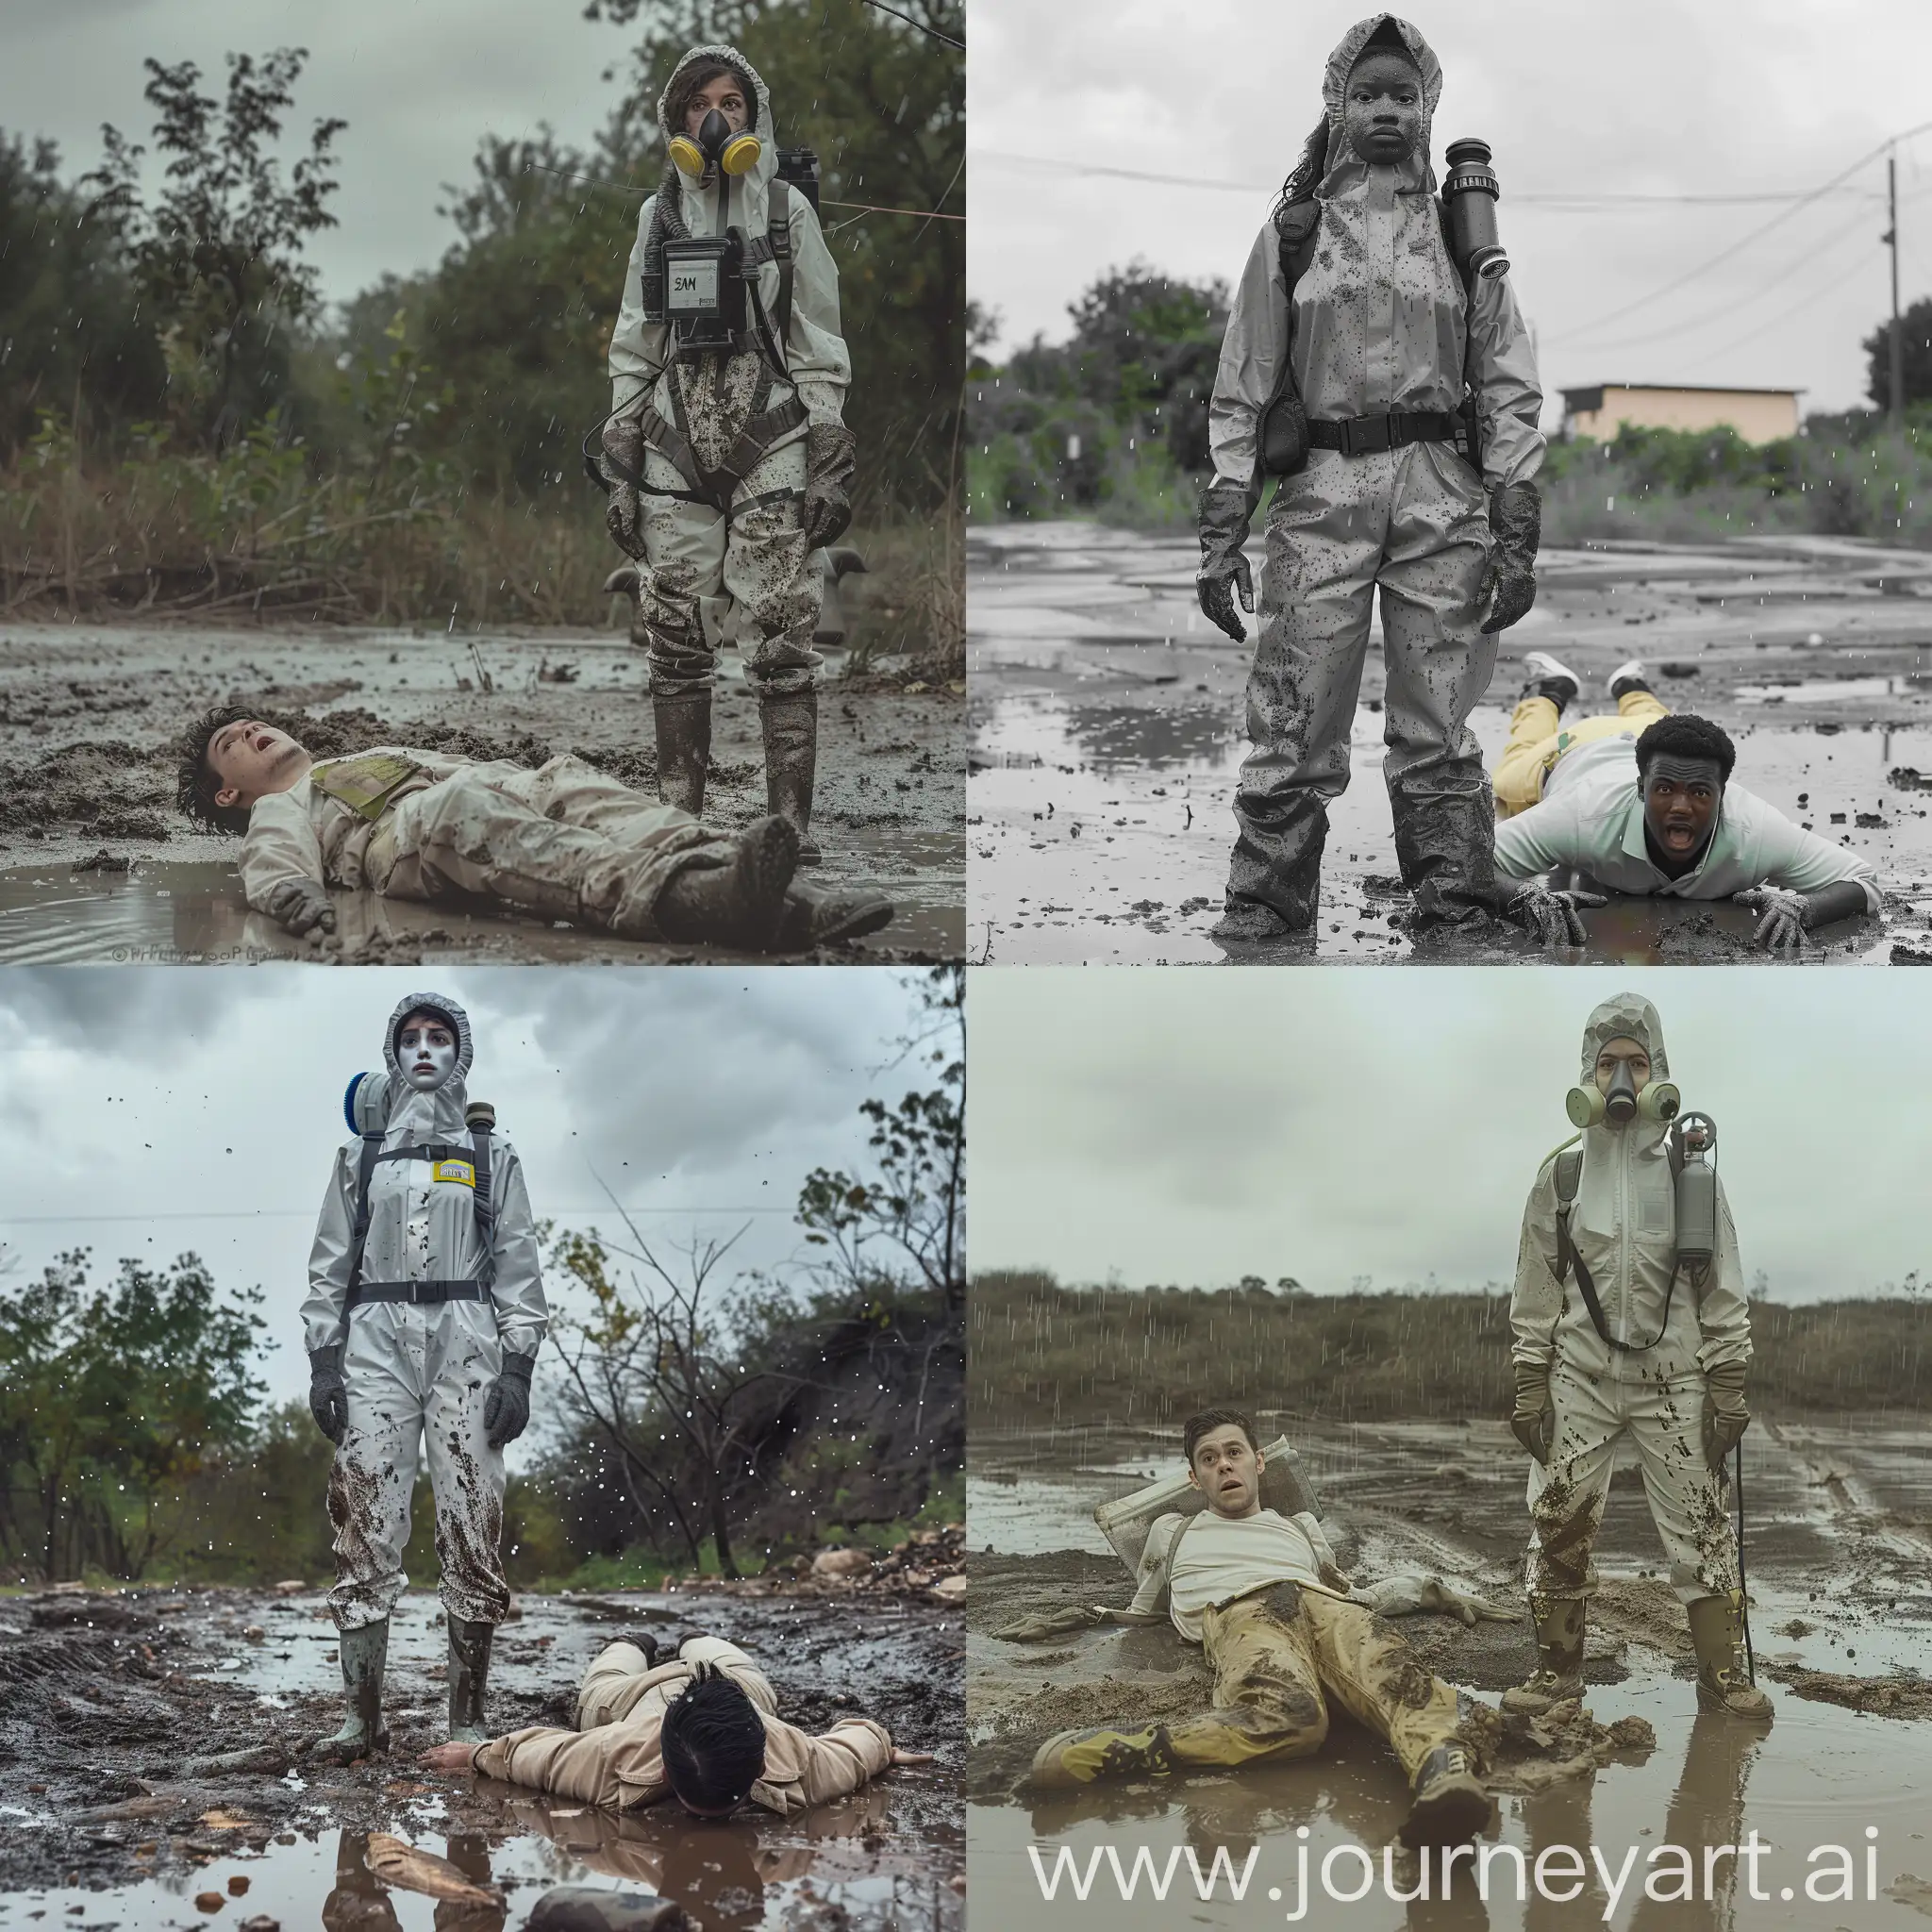 full-length vivid colored photo of two persons
background: outdoor, rainy day, wet muddy ground 
person 1: woman wears protective gear, the strong Trellchem fullbody hazmat overall suit with hood, face fully covered with 3M fullface gasmask, rubber gloves, rubber shoes, no exposed skin, everything is sealed, oxygen tanks on the back, stand straight, confident, drops of mud on suit
person 2: scared man in light casual outfit lays on the ground